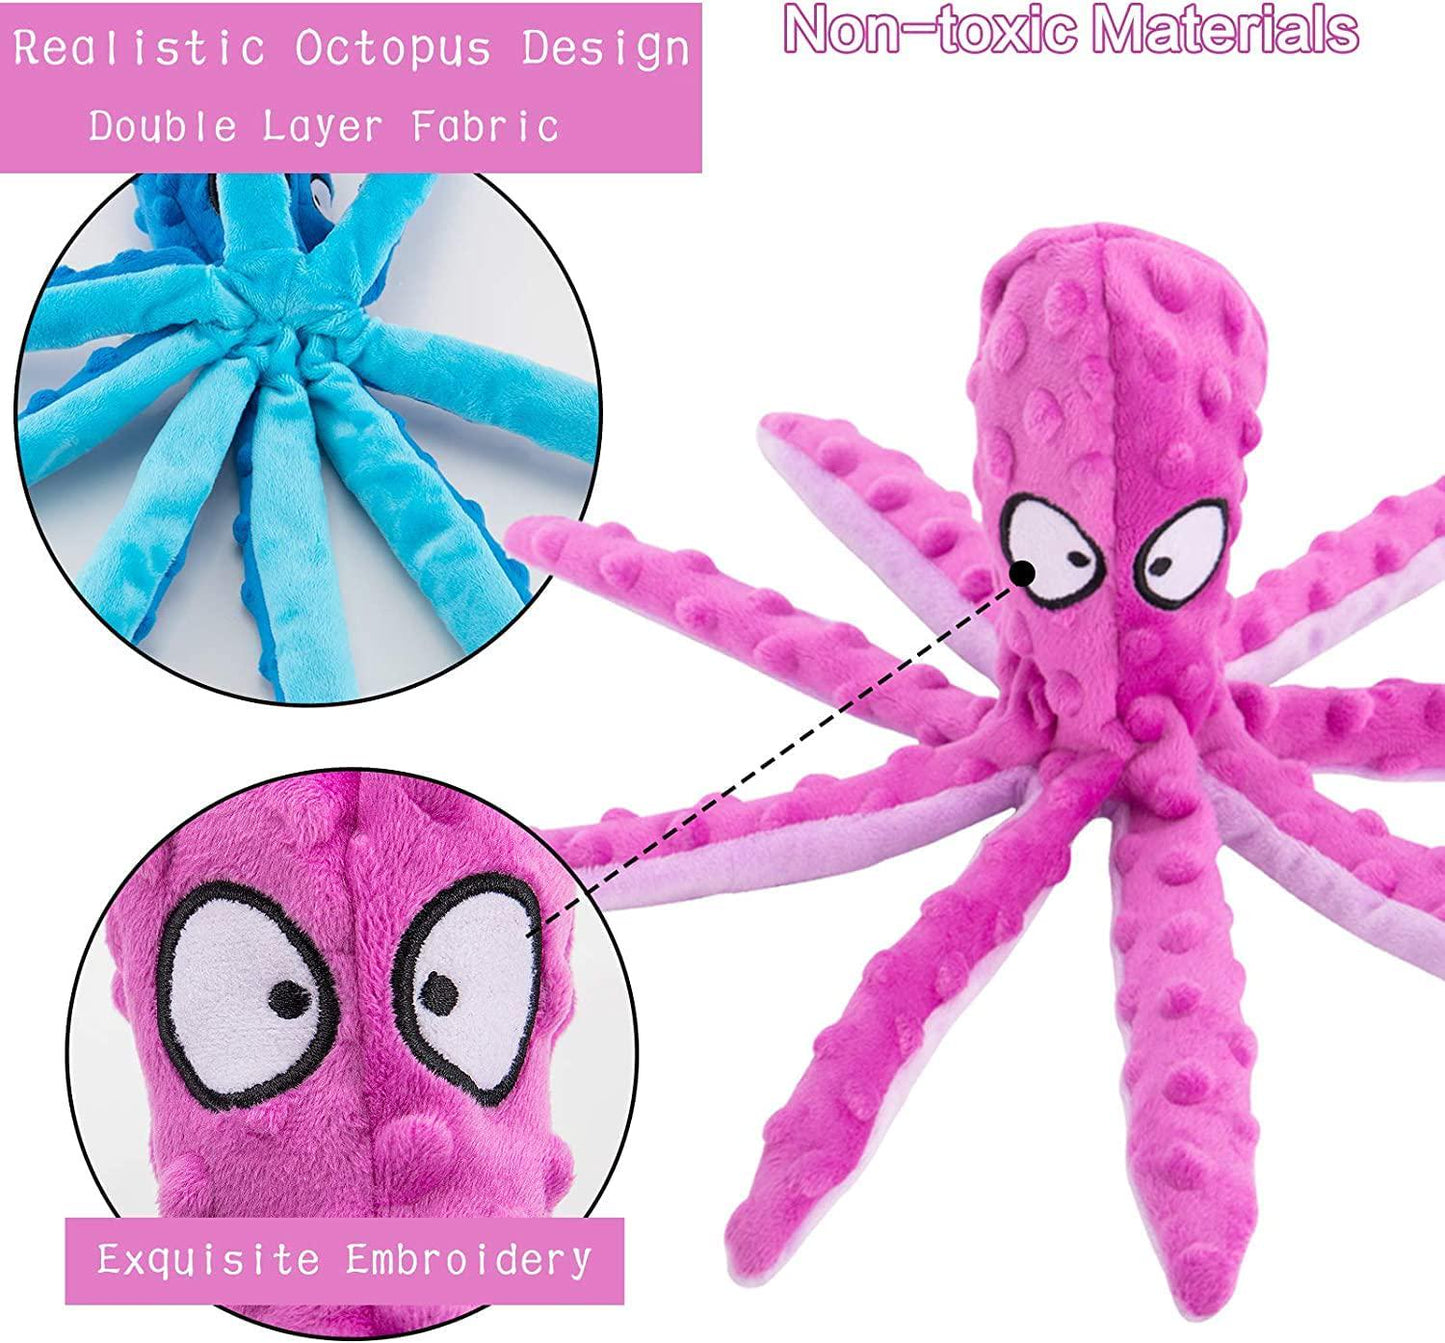 Squeaky Dog Toys, Octopus Toys for Aggressive Chewers, Tough No Stuffing Plush Large Dogs, Crinkle Interactive Puppy Small Medium Dogs(3pcs)